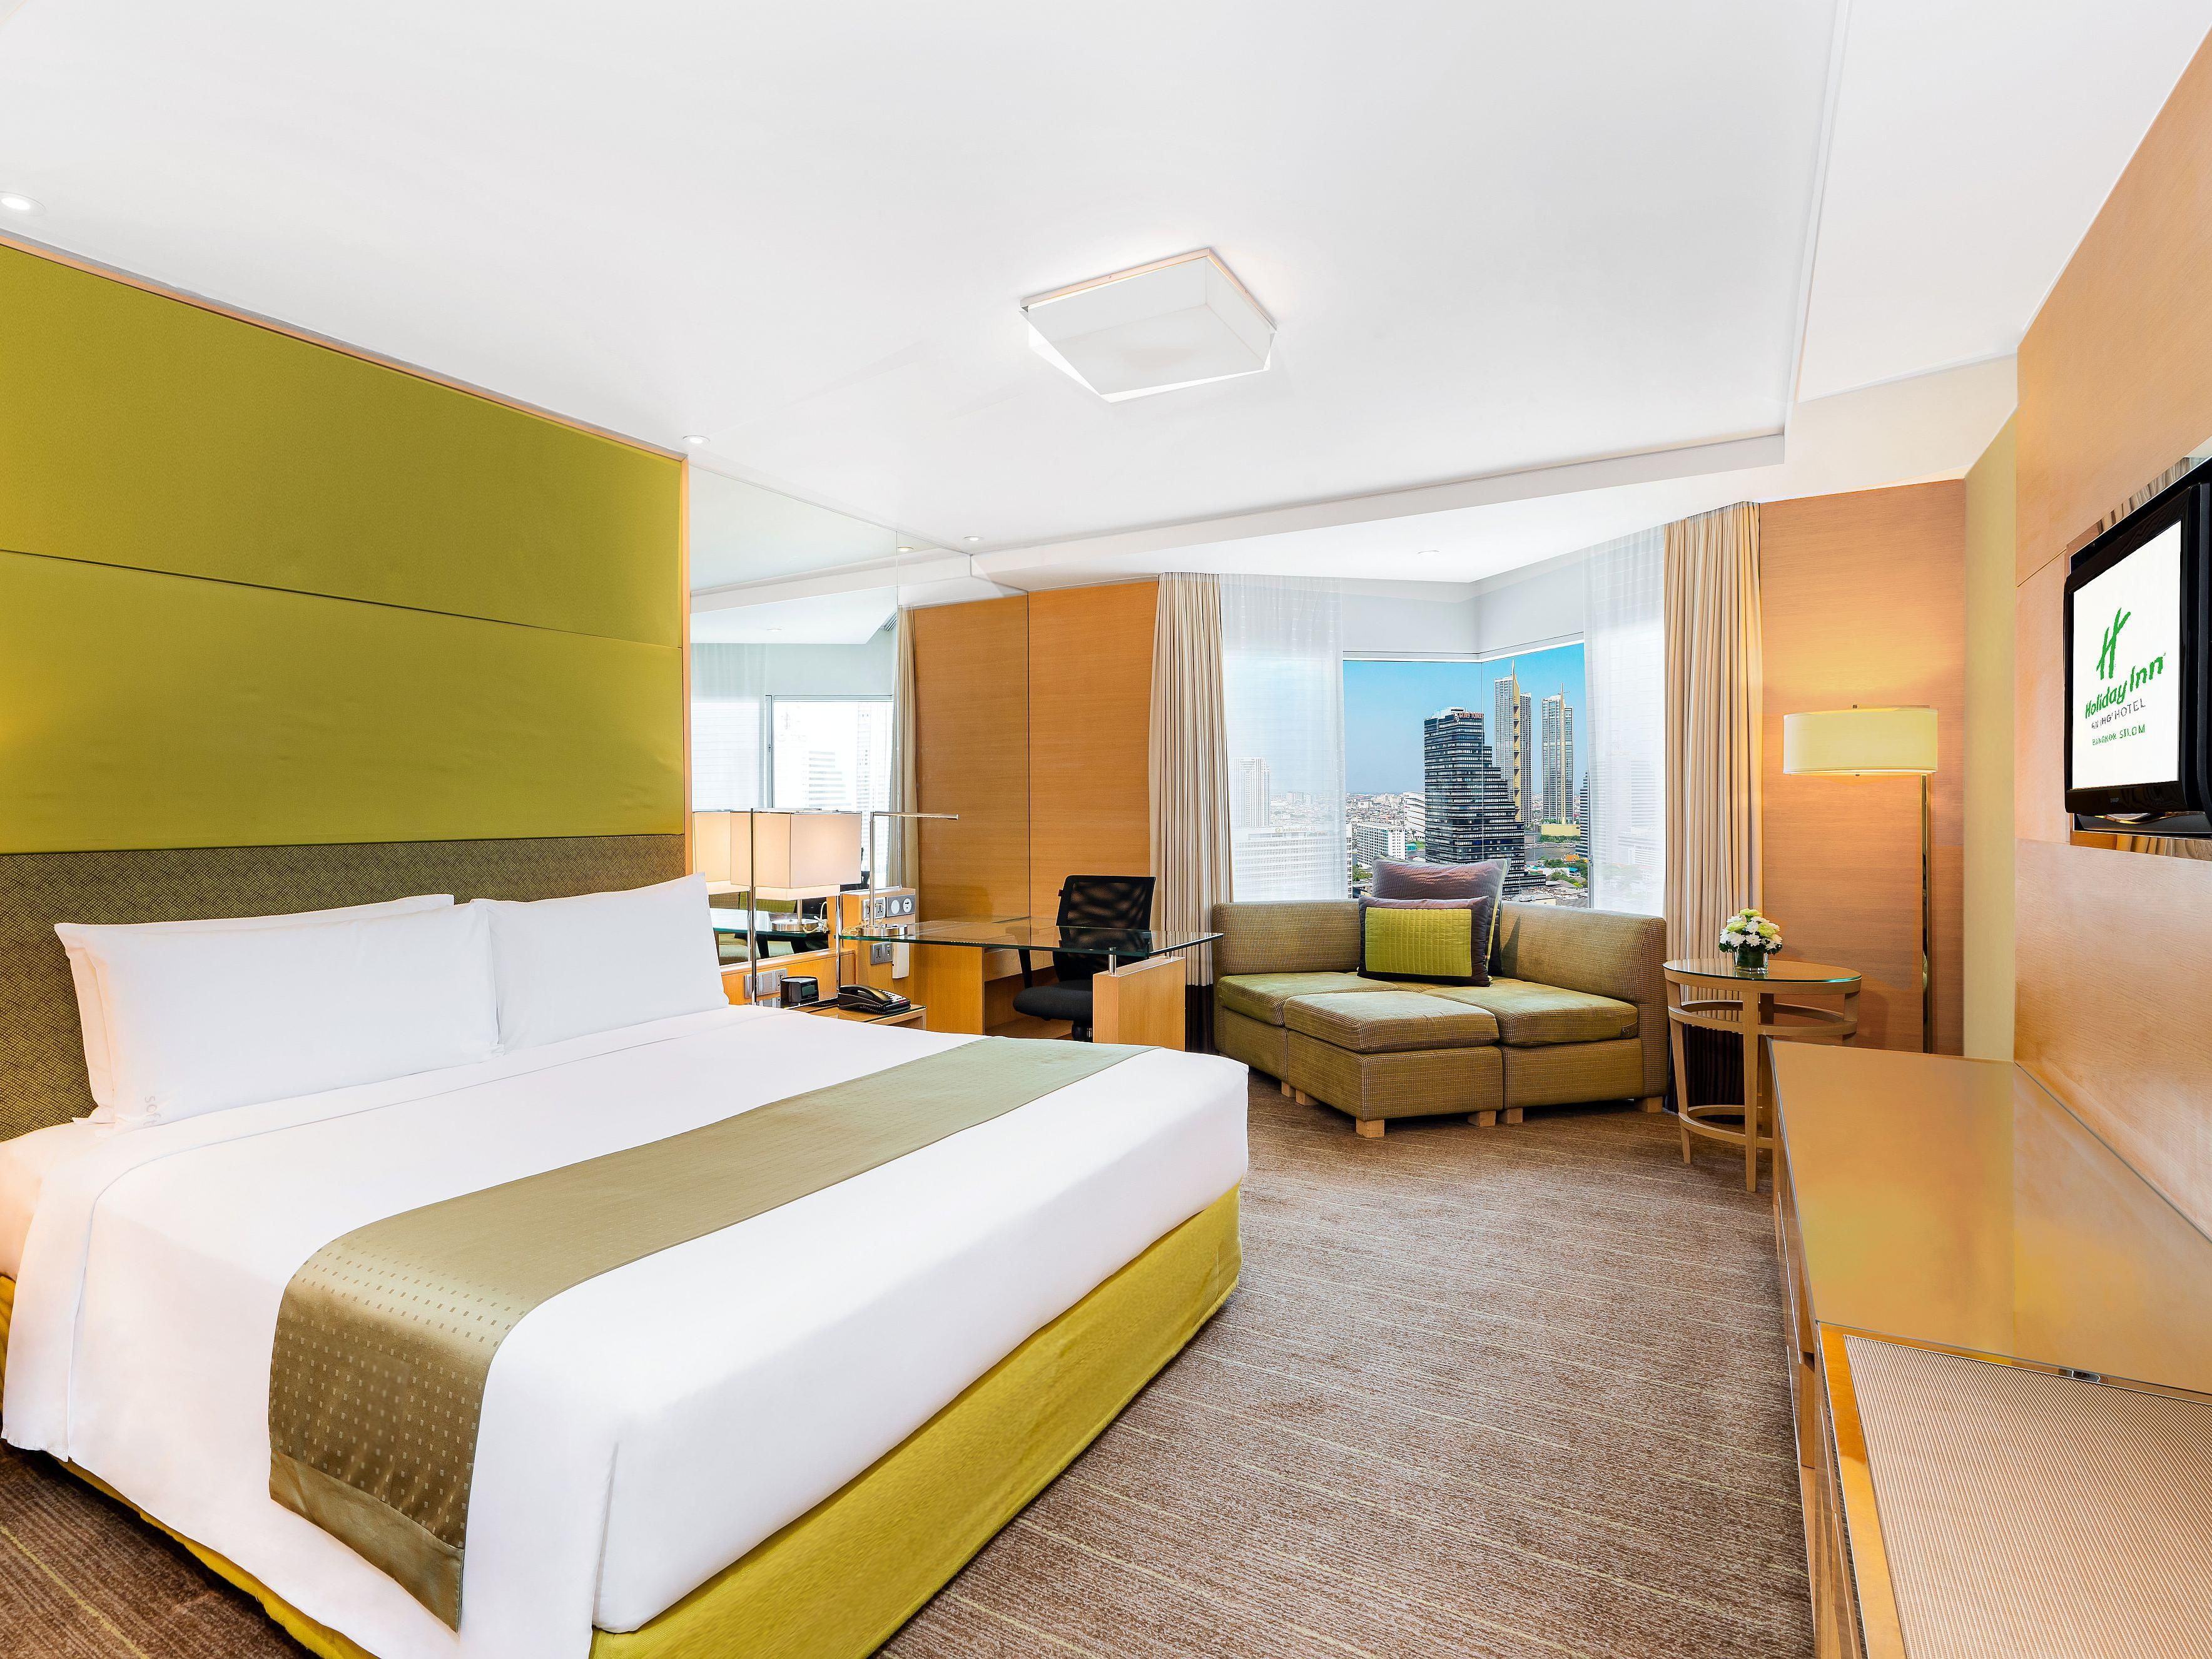 With 684 rooms, Holiday Inn Bangkok Silom stands as the largest hotel in the Silom Area, offering a remarkable blend of scale and sophistication. Step into a world where spacious guest rooms boast chic designs, high-speed Internet ensures connectivity, and every detail is curated to enhance your stay in the heart of Bangkok.